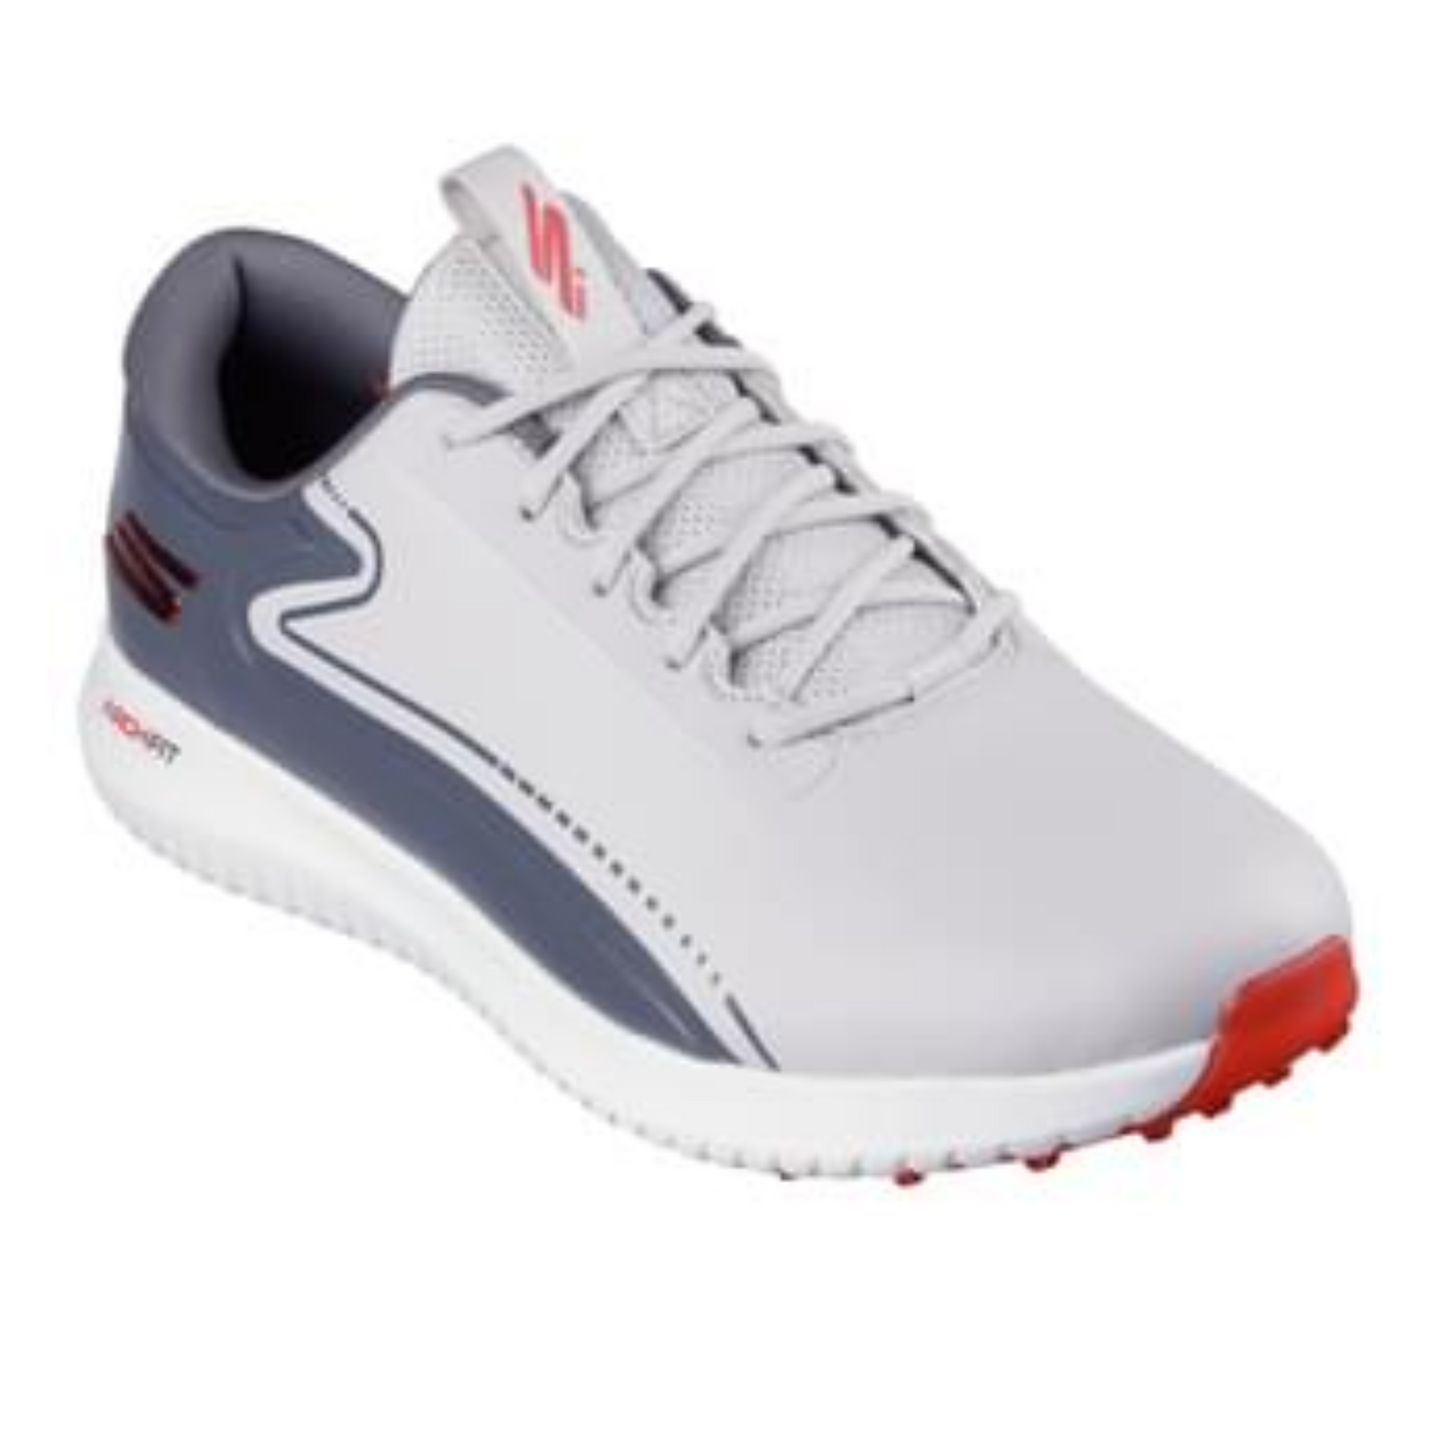 Skechers Go Golf Max 3 Spikeless Golf Shoes 214080 - White Grey Red   